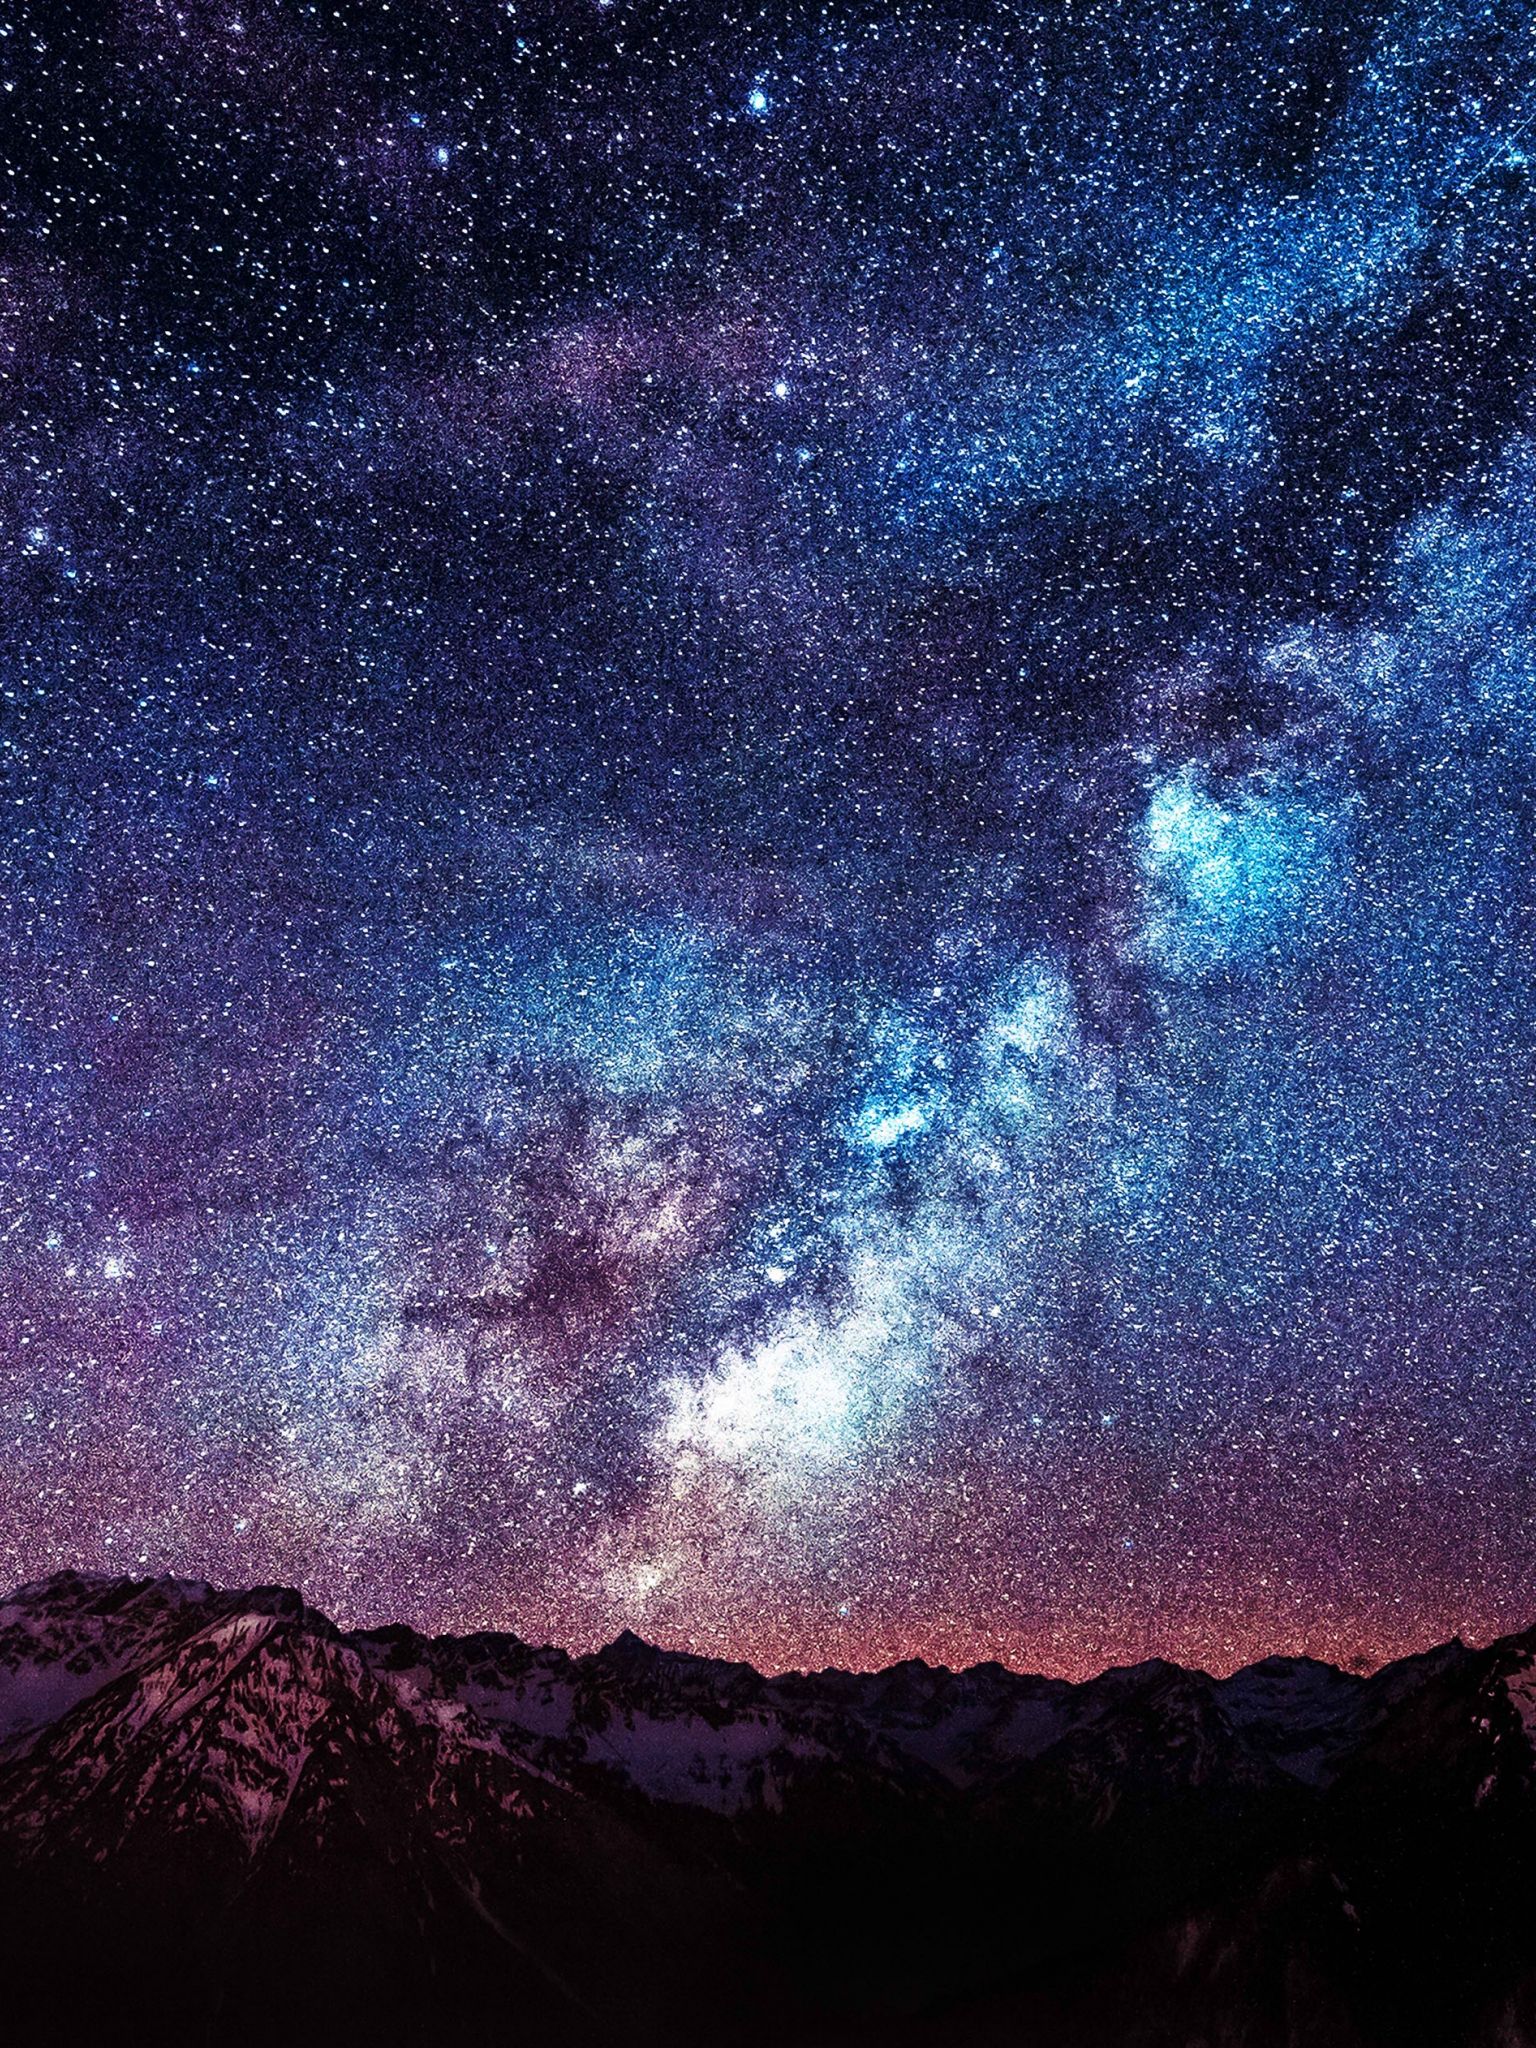 Free download wallpaper amazing milkyway space mountain red 9